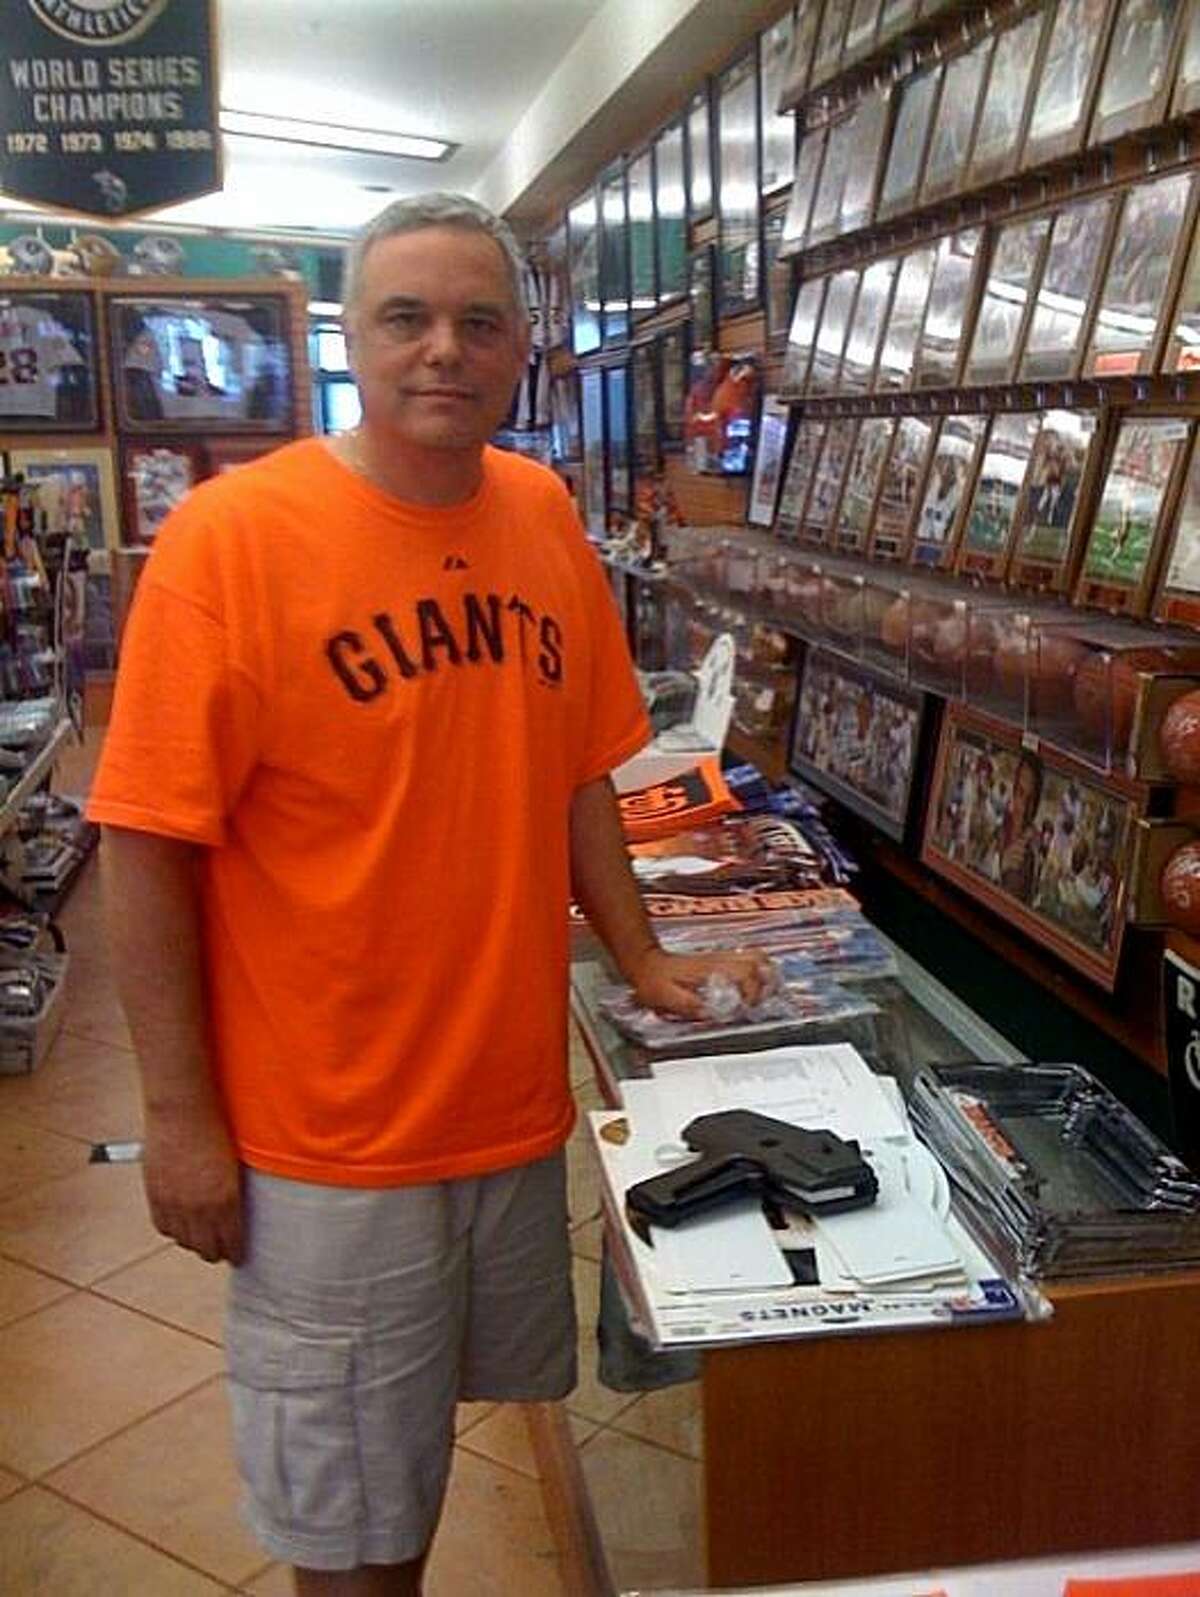 Jim Bernardin, co-owner of Lefty's Sports Collectibles in Burlingame, estimates sports cards still account for 40% of his business, but fewer kids are in the market.